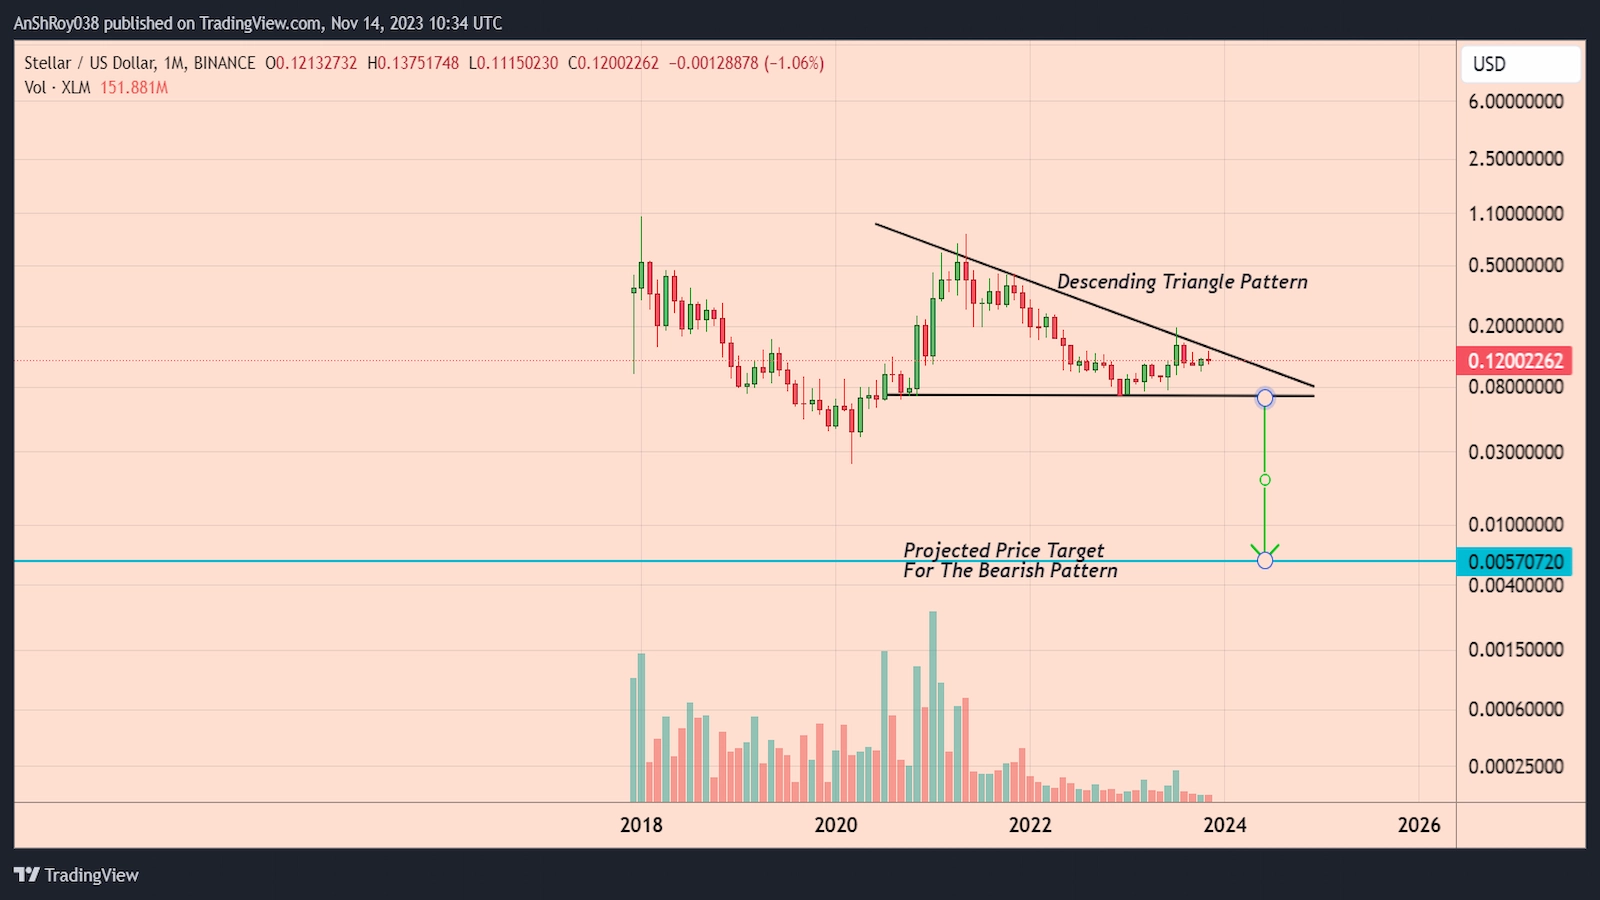 XLM price has formed a bearish pattern with a 95% downside target.